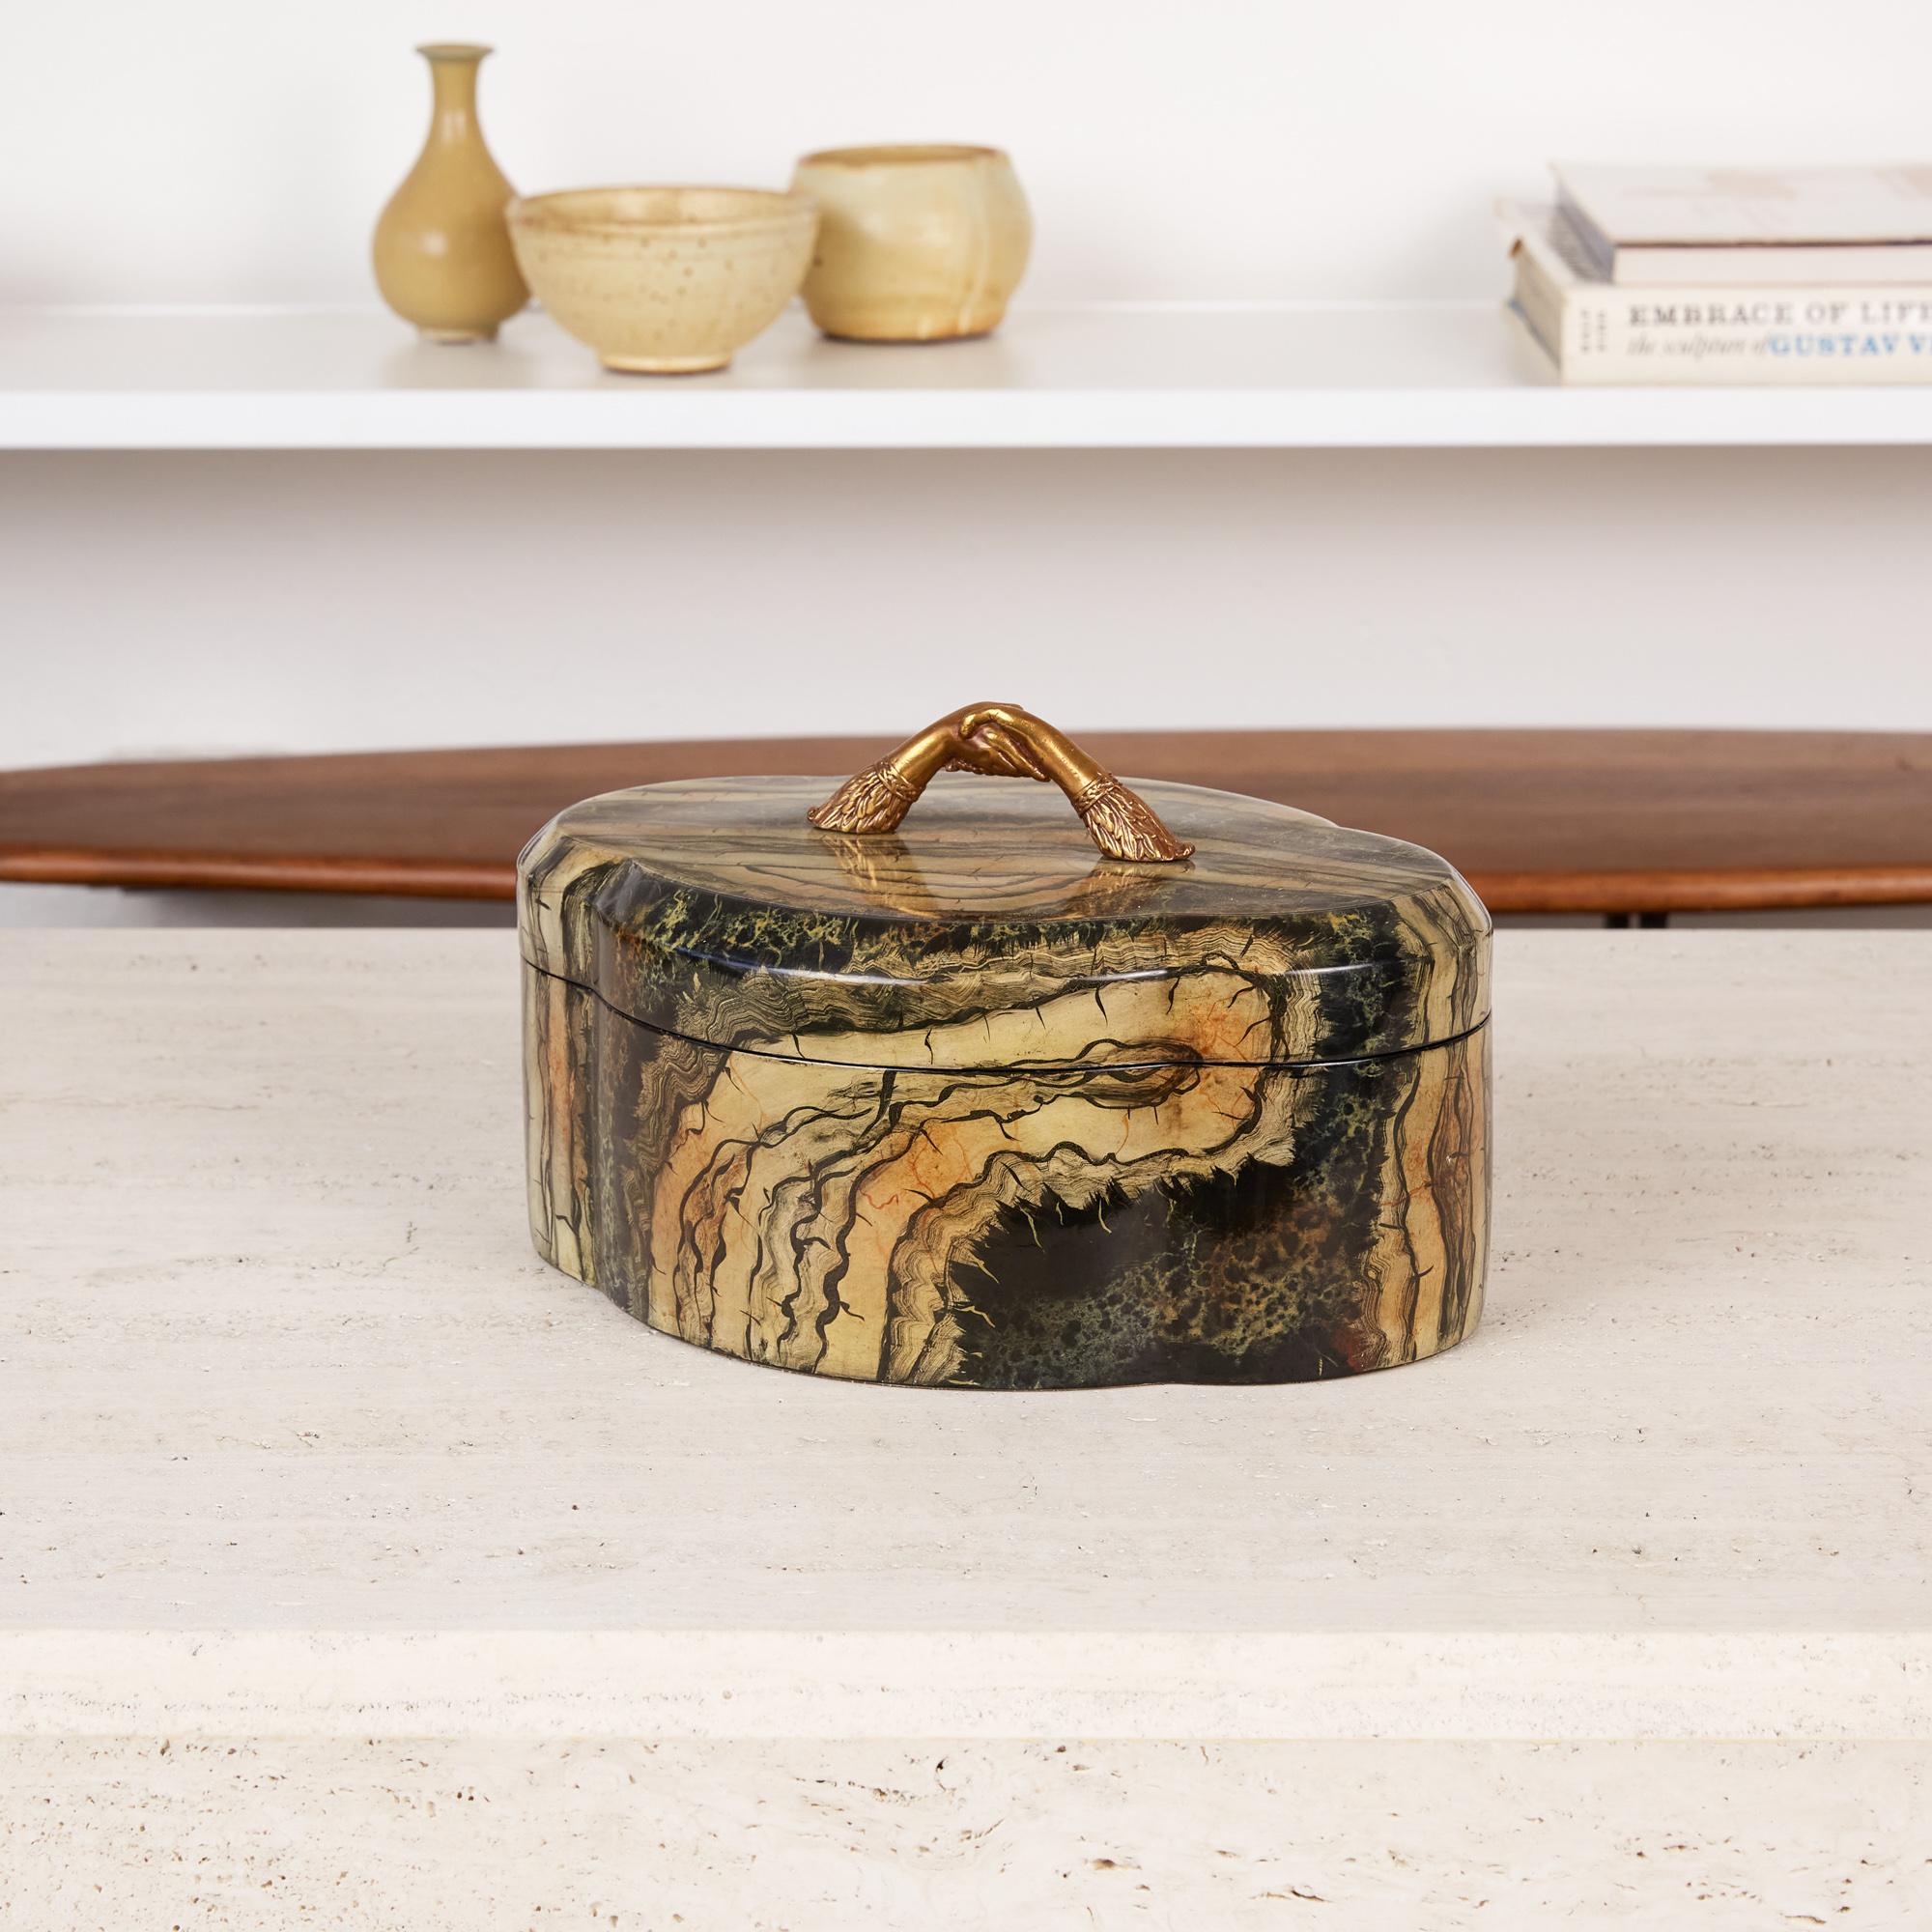 Maitland Smith decorative box, circa 1970s. The box features a hand painted petrified wood style exterior with black lacquered interior. The top is accented by a brass handle made of two arms with shaking hands. The chic design is the perfect piece